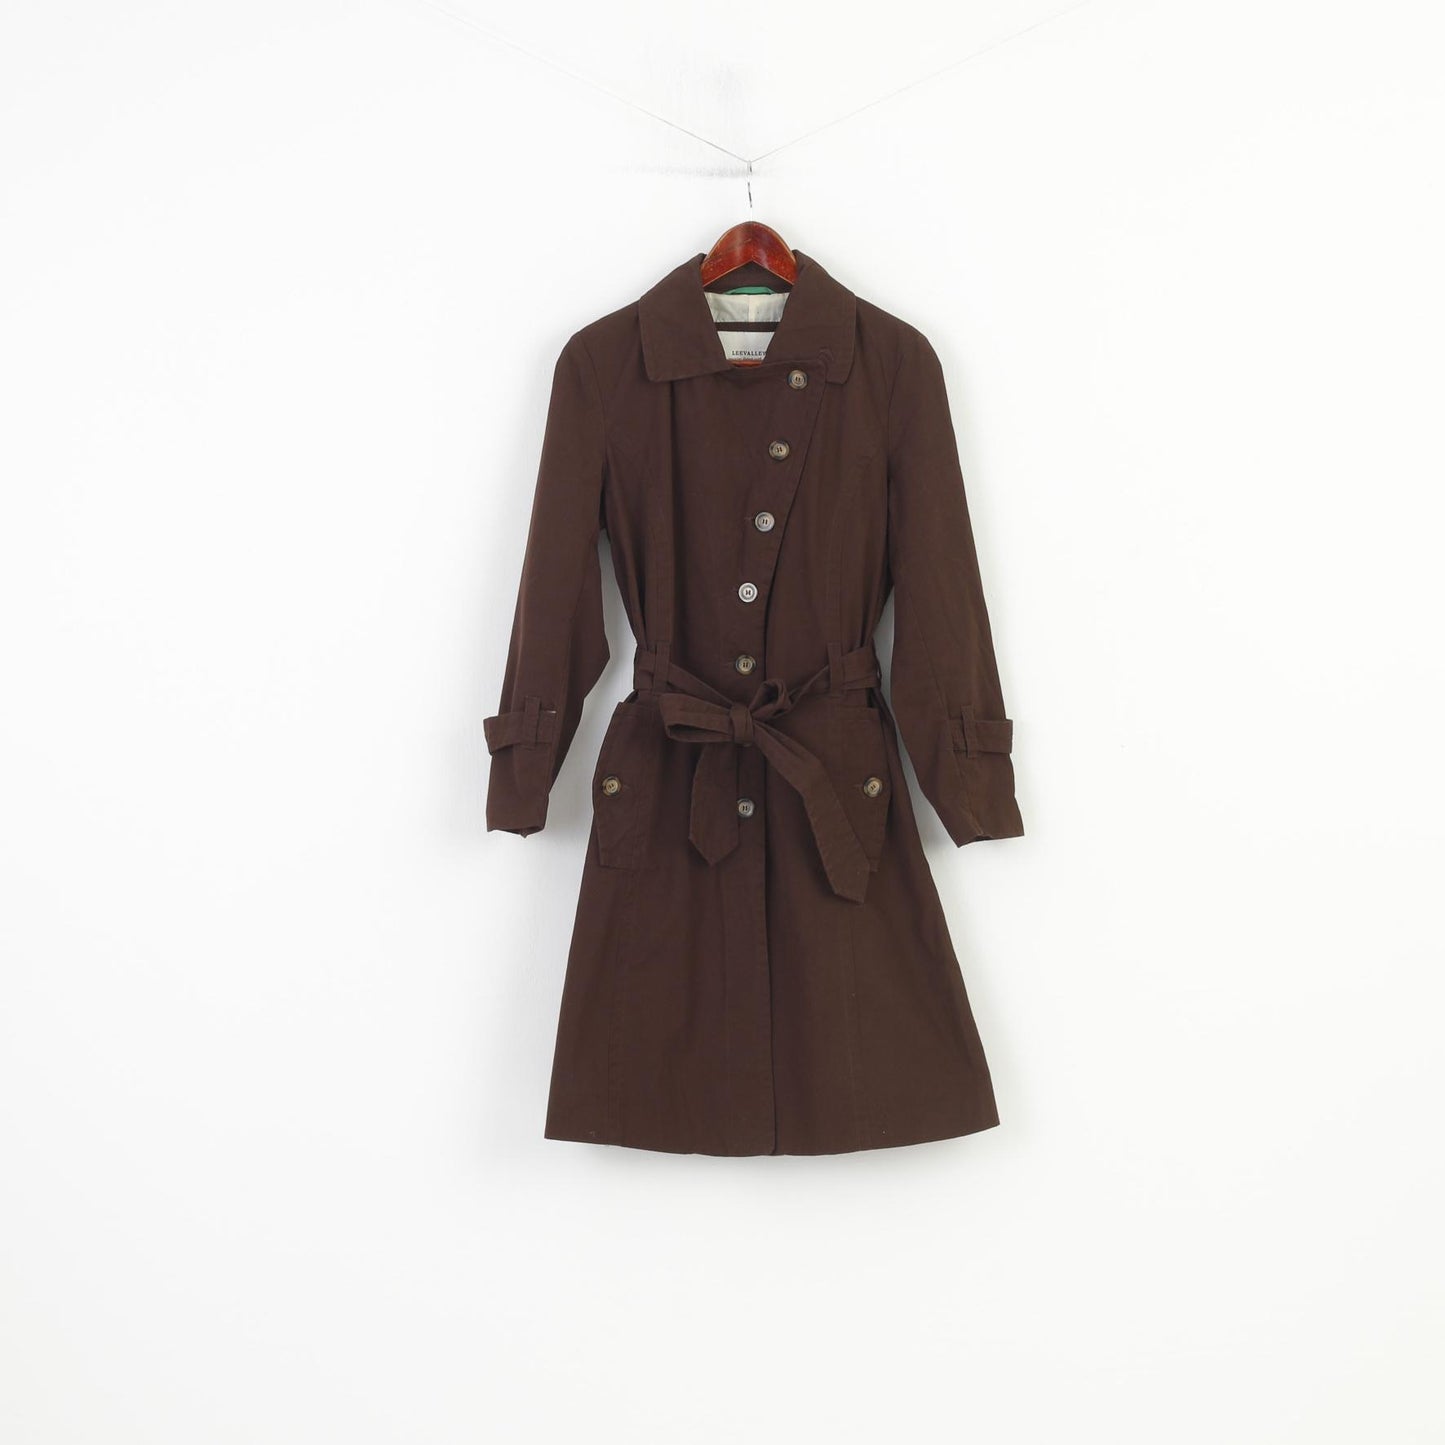 Leevalley Women M Coat Brown Trench Cotton Single Breasted Bottoms Collar Country Belt Jacket